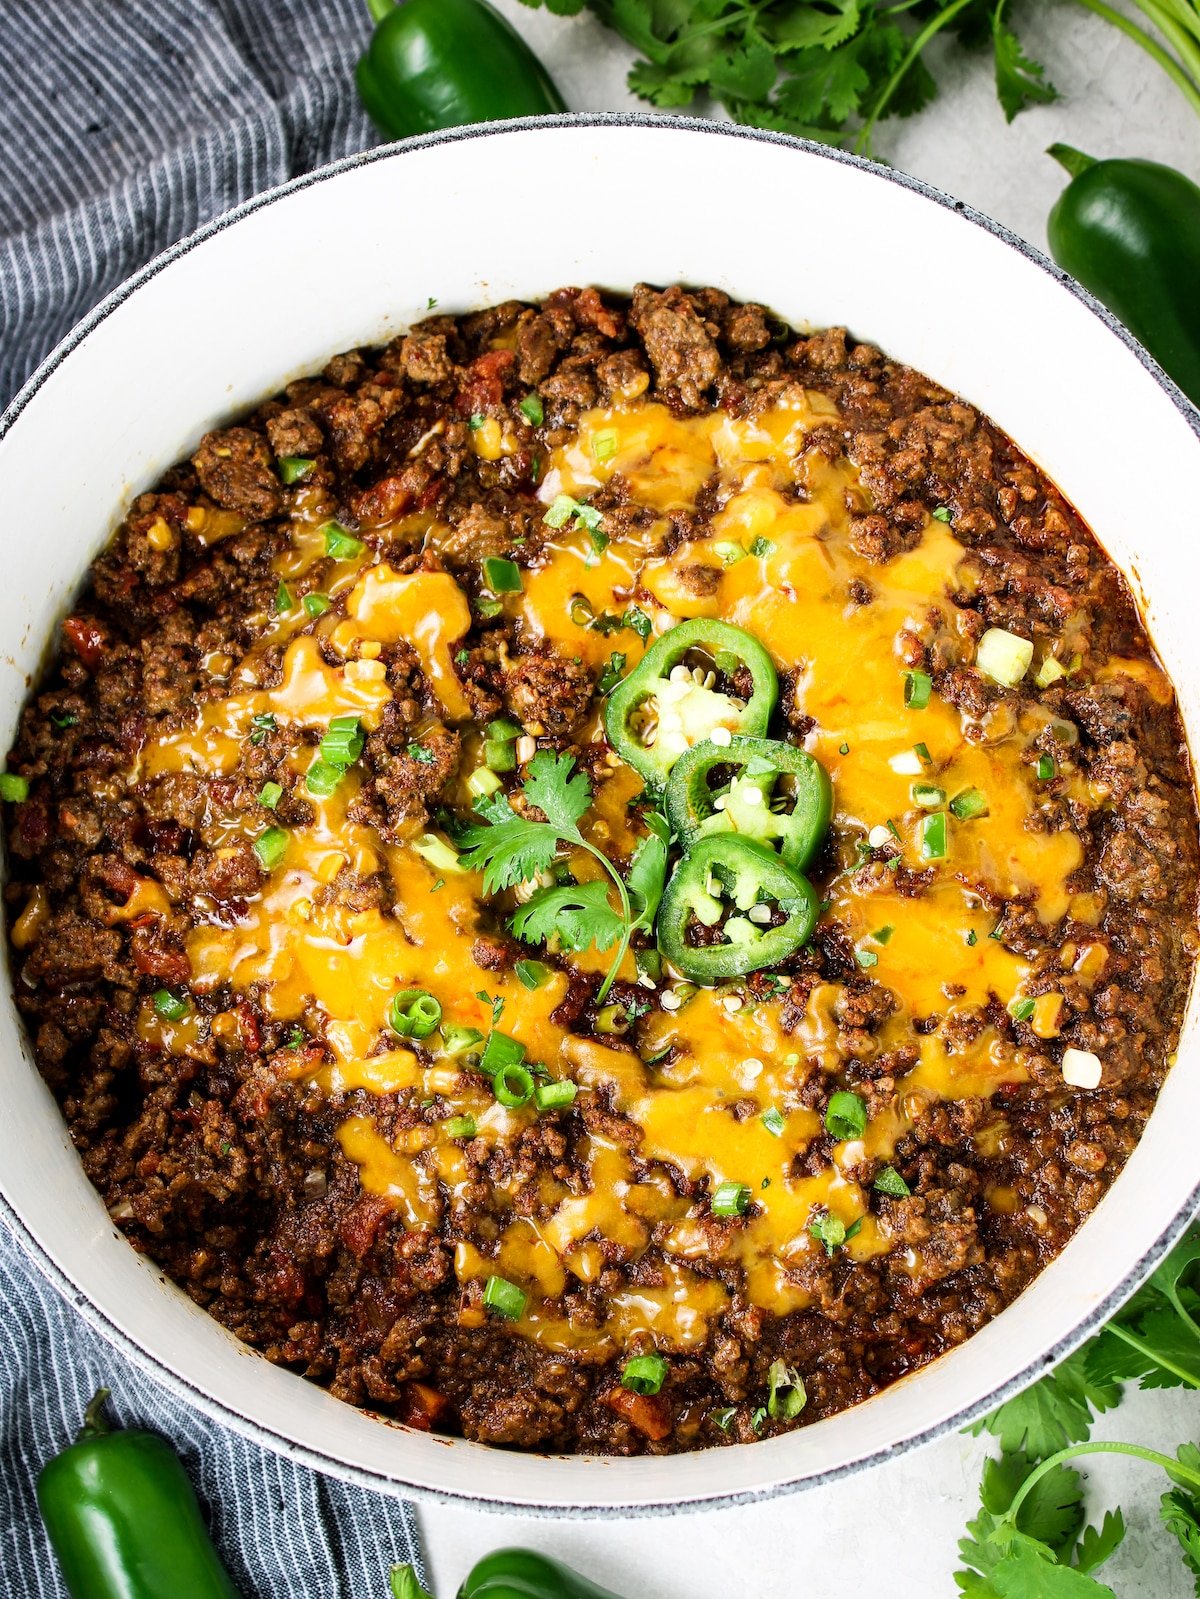 A large pot of chili without beans and melted cheese on top.